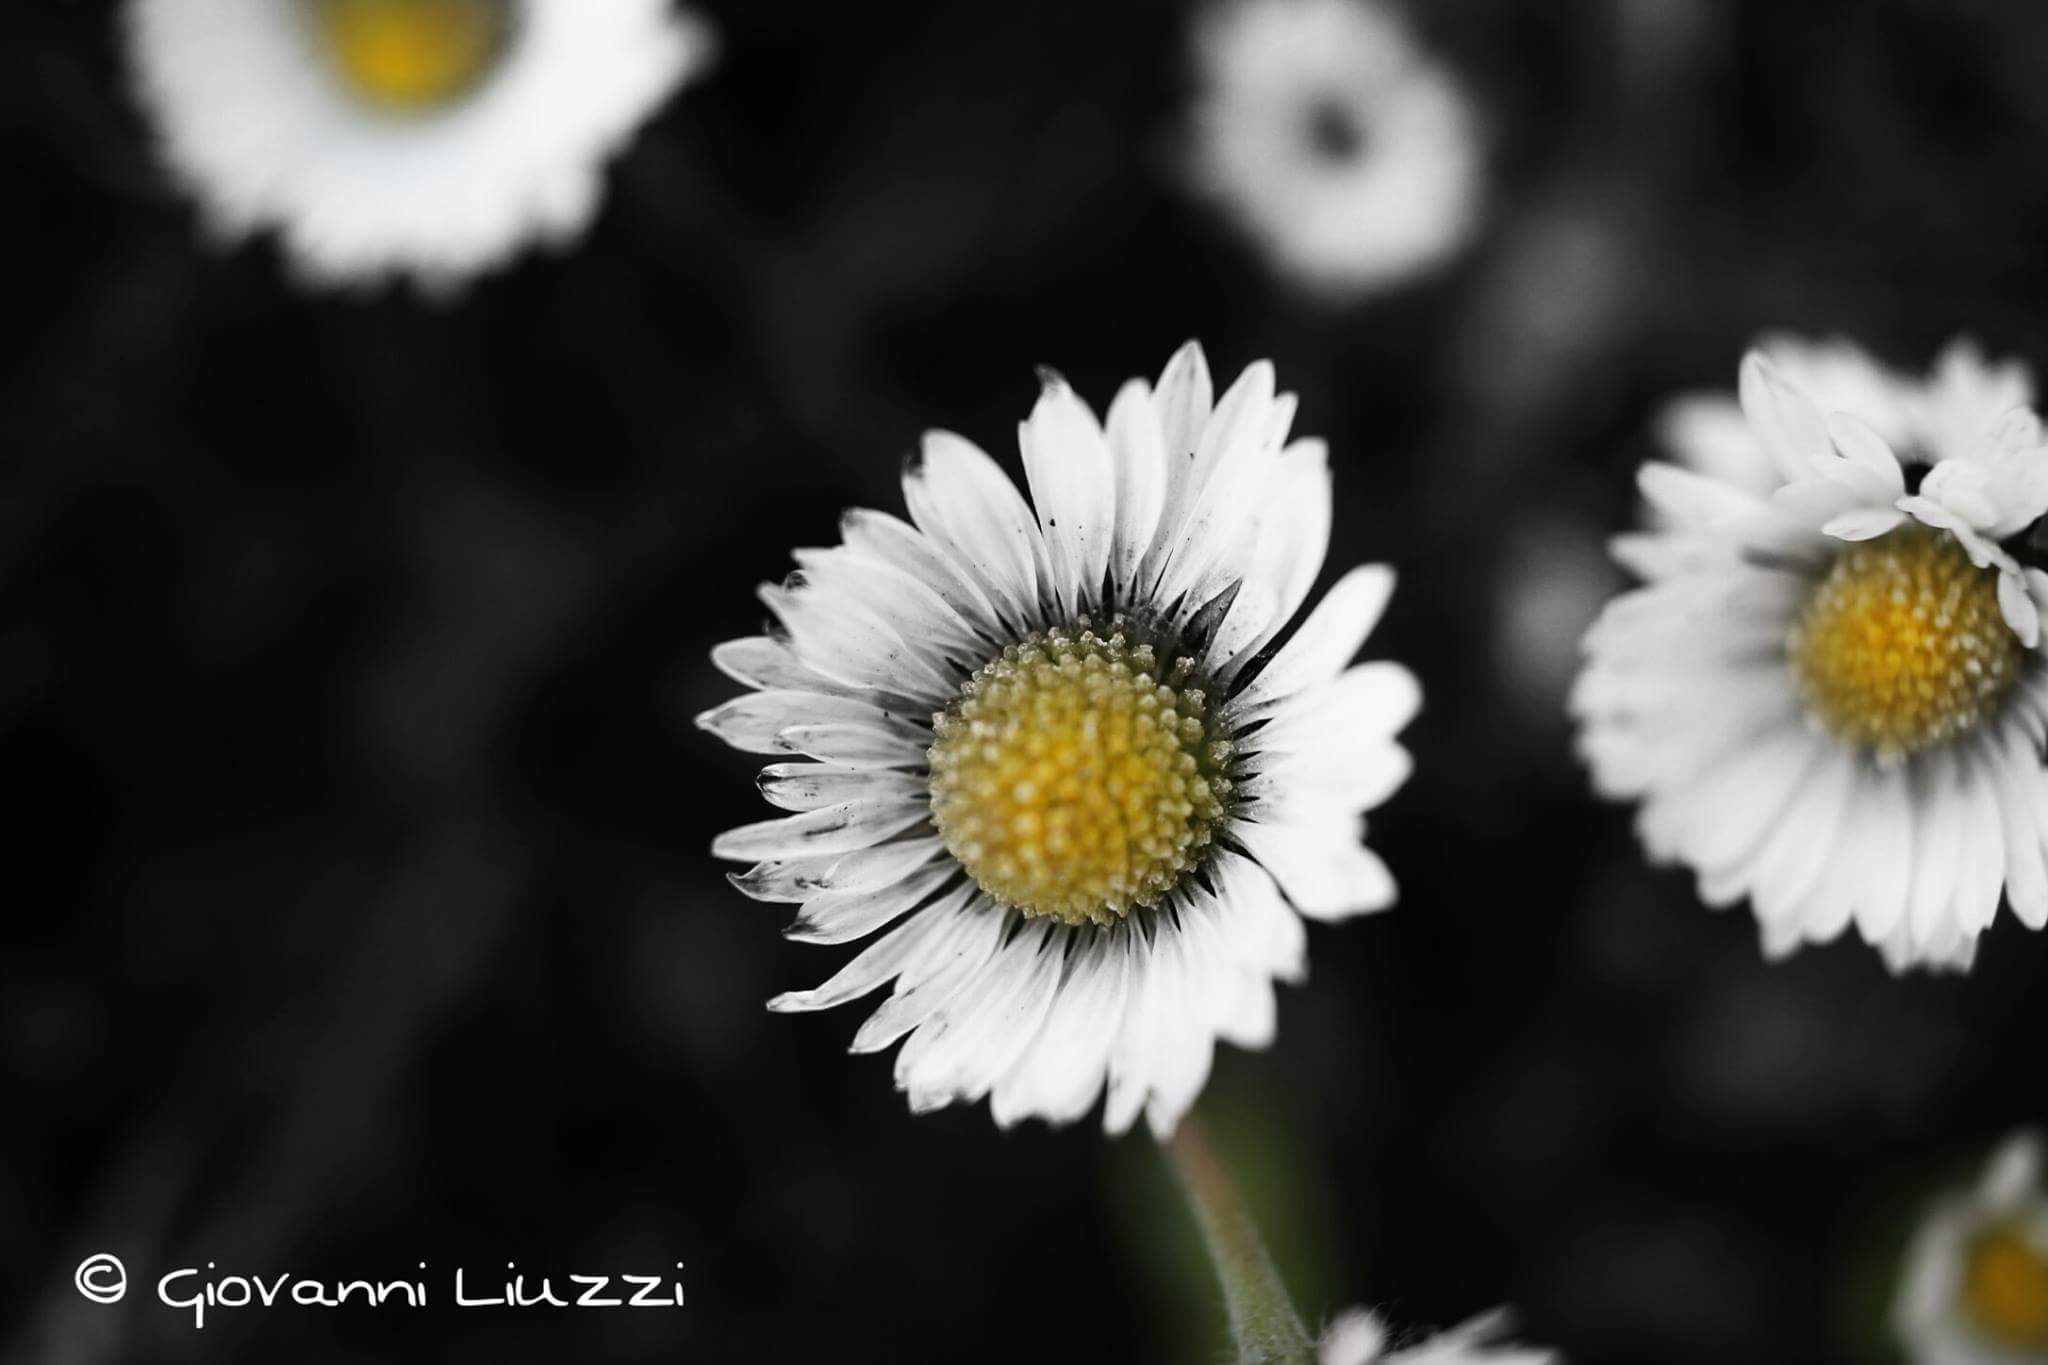 Portrait of a daisy...